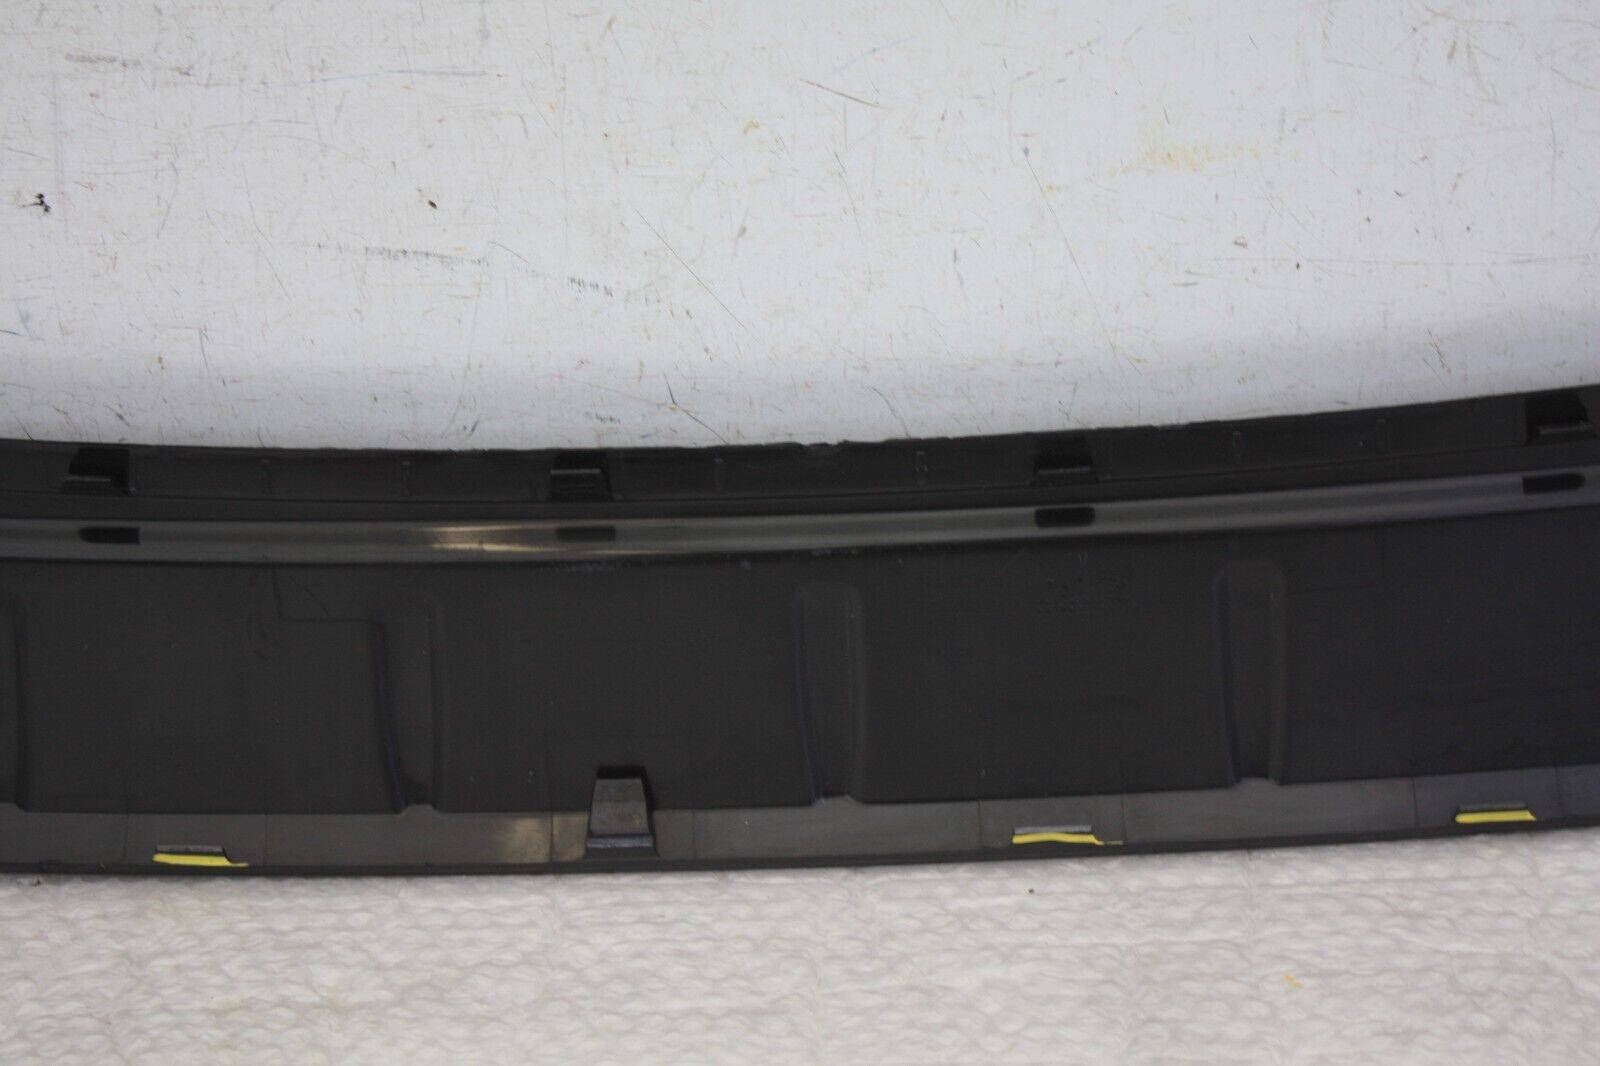 Volvo-XC60-Rear-Bumper-Protection-Cover-30764525-Genuine-FIXING-DAMAGED-176362657810-14